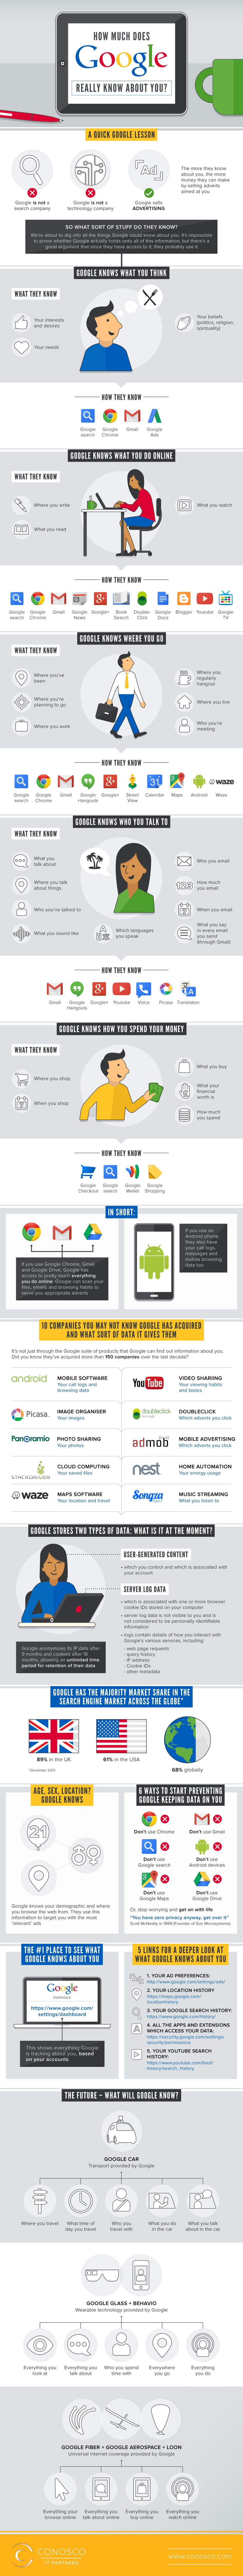 How Much Does Google Really Know About You?